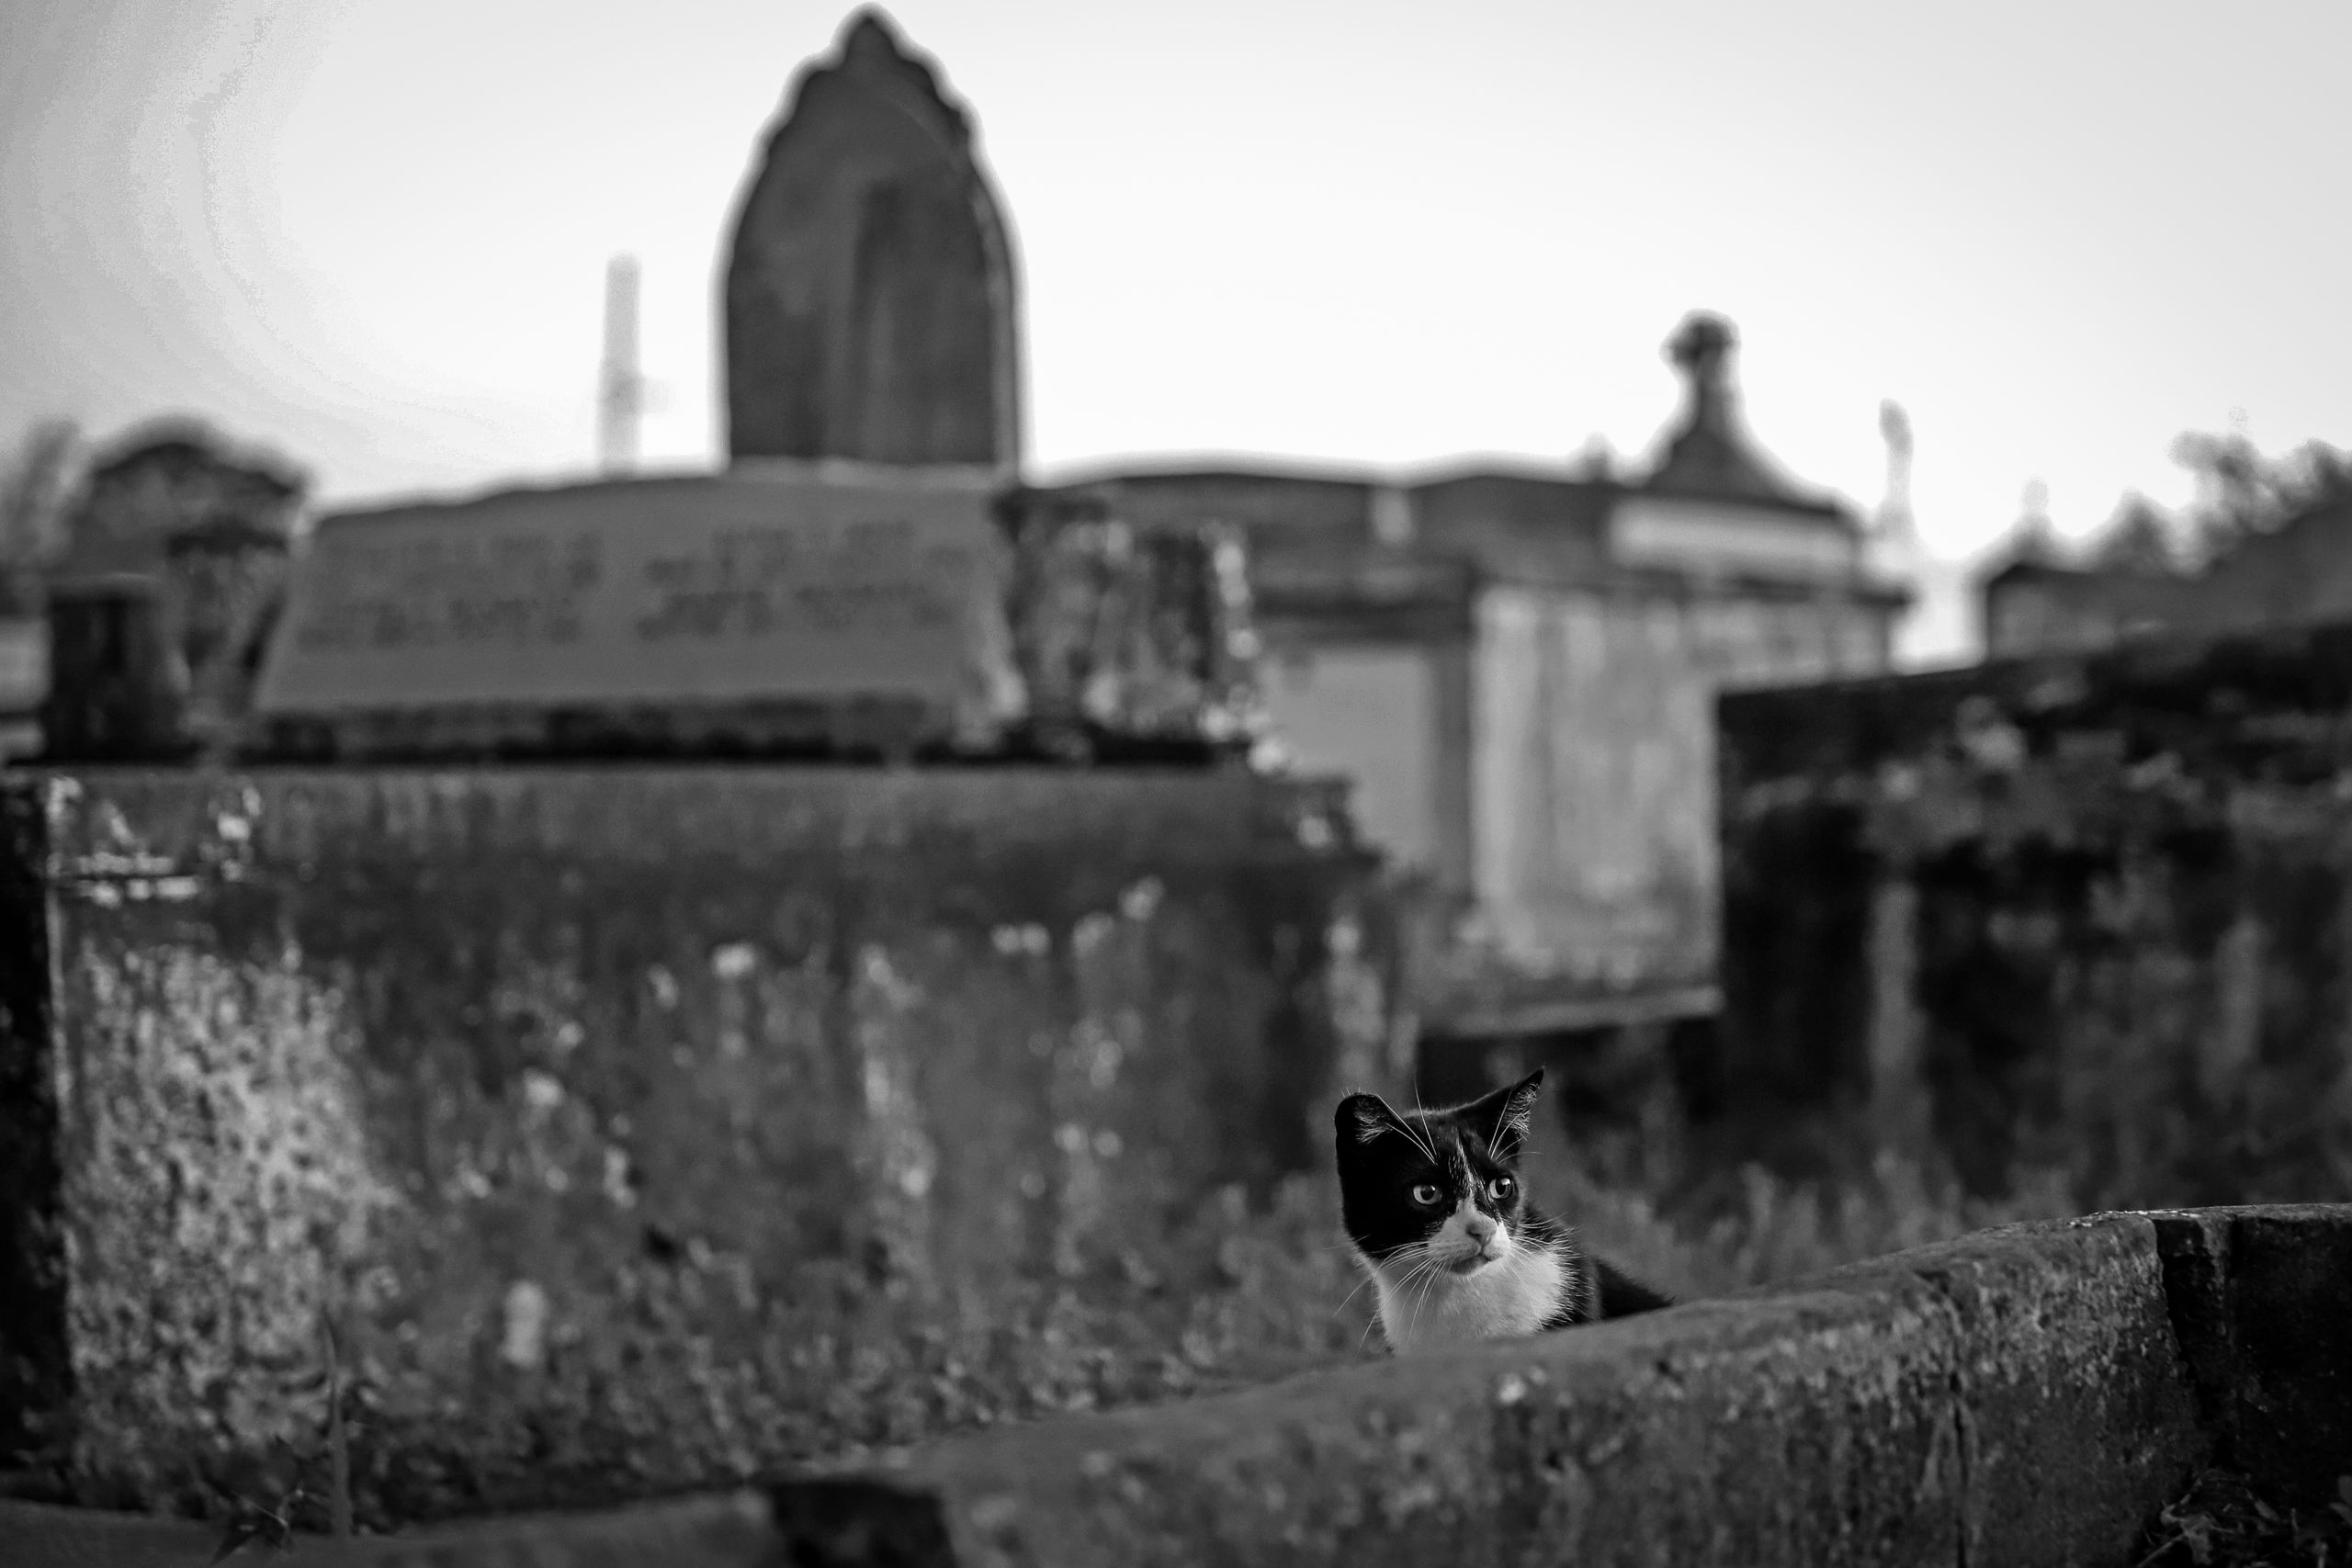 A cat stalks the St. Mary’s Cemetery. (Photo by Michael DeMocker)